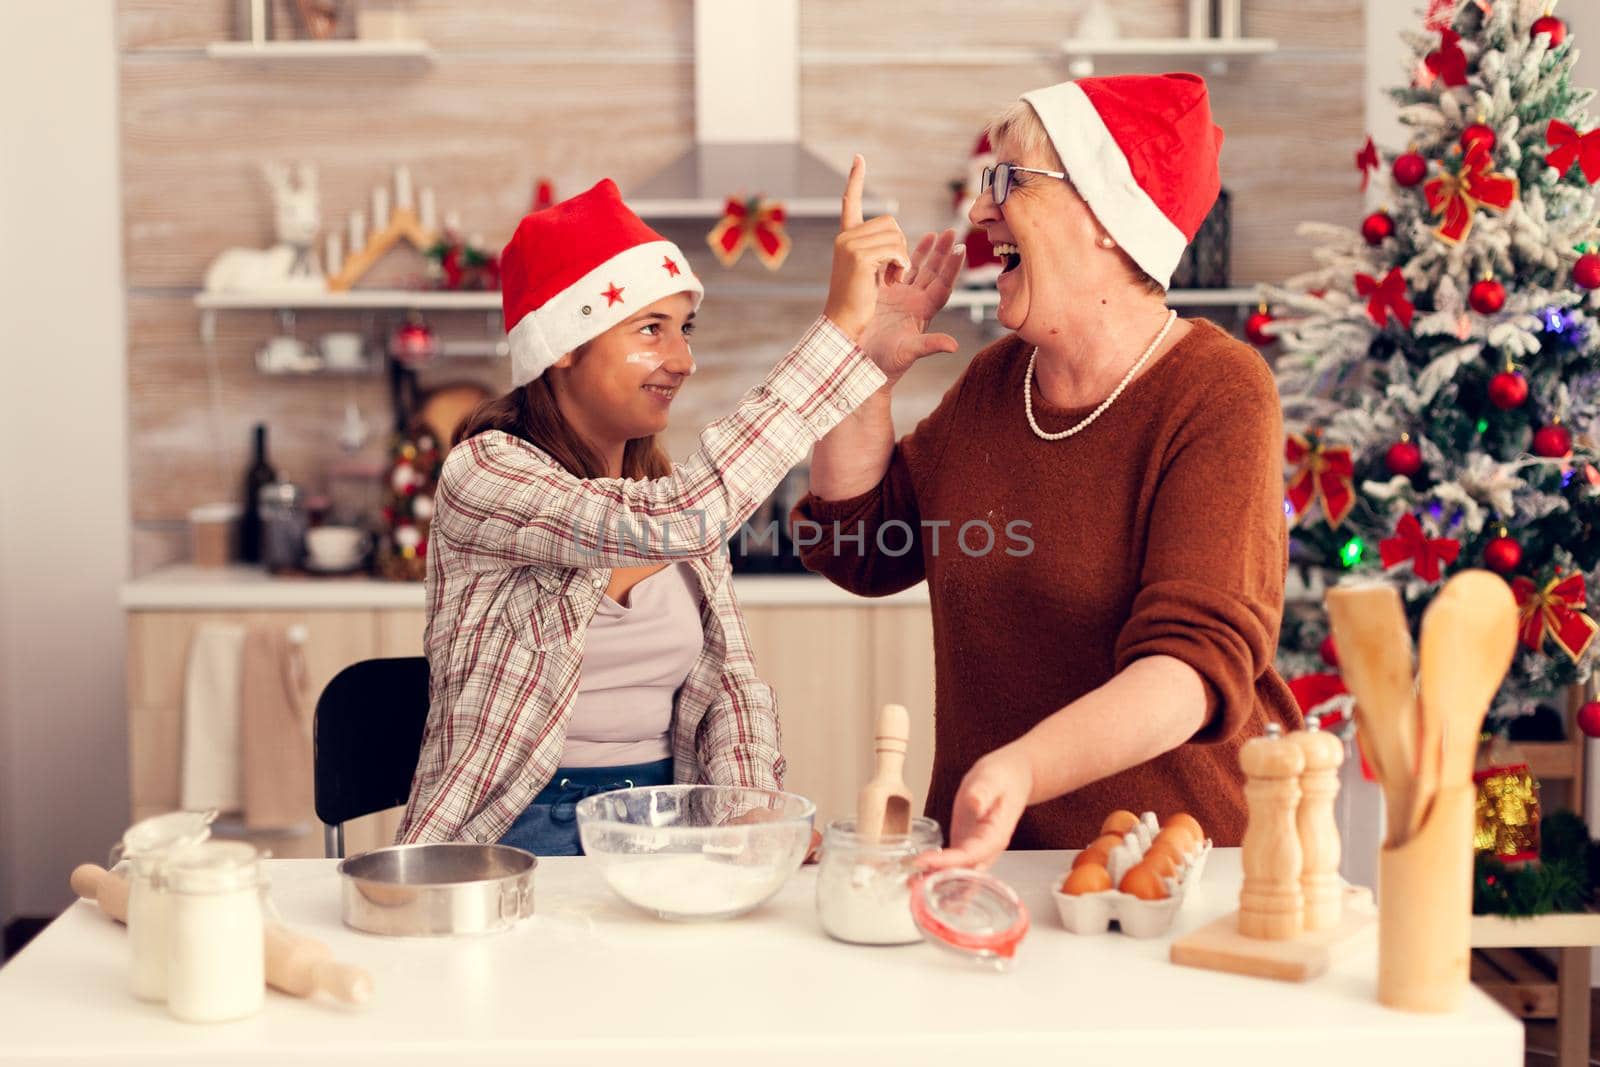 Niece and granddmother on christmas day enjoying making cakes and cookies. Happy cheerful joyfull teenage girl helping senior woman preparing sweet biscuits to celebrate winter holidays wearing santa hat.